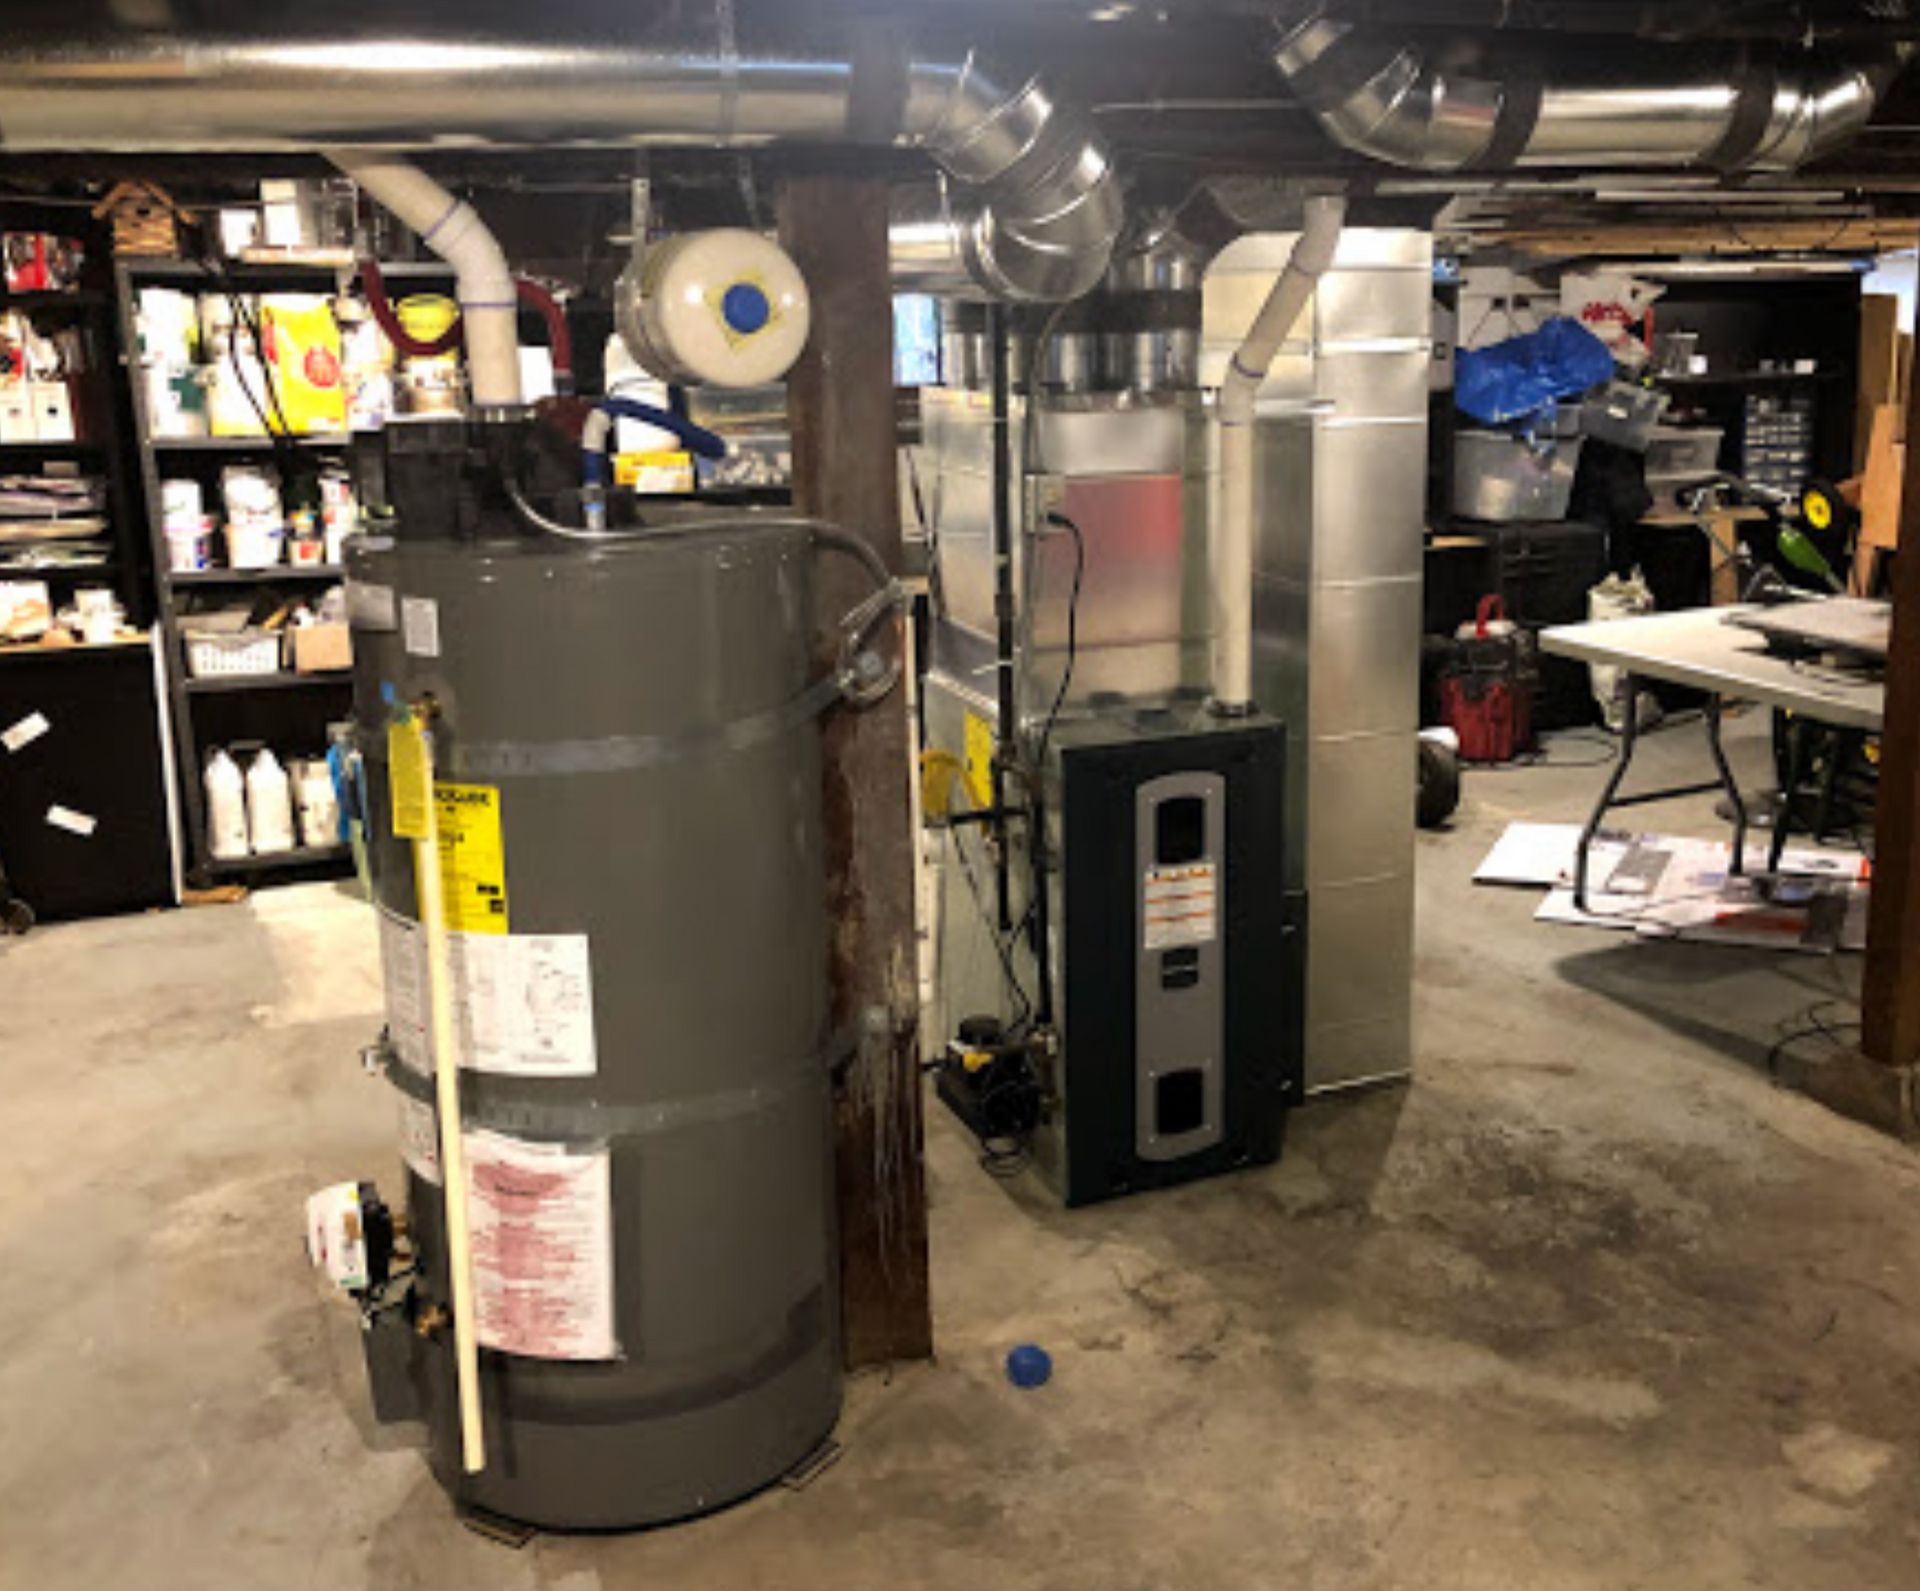 Furnace System in Basement